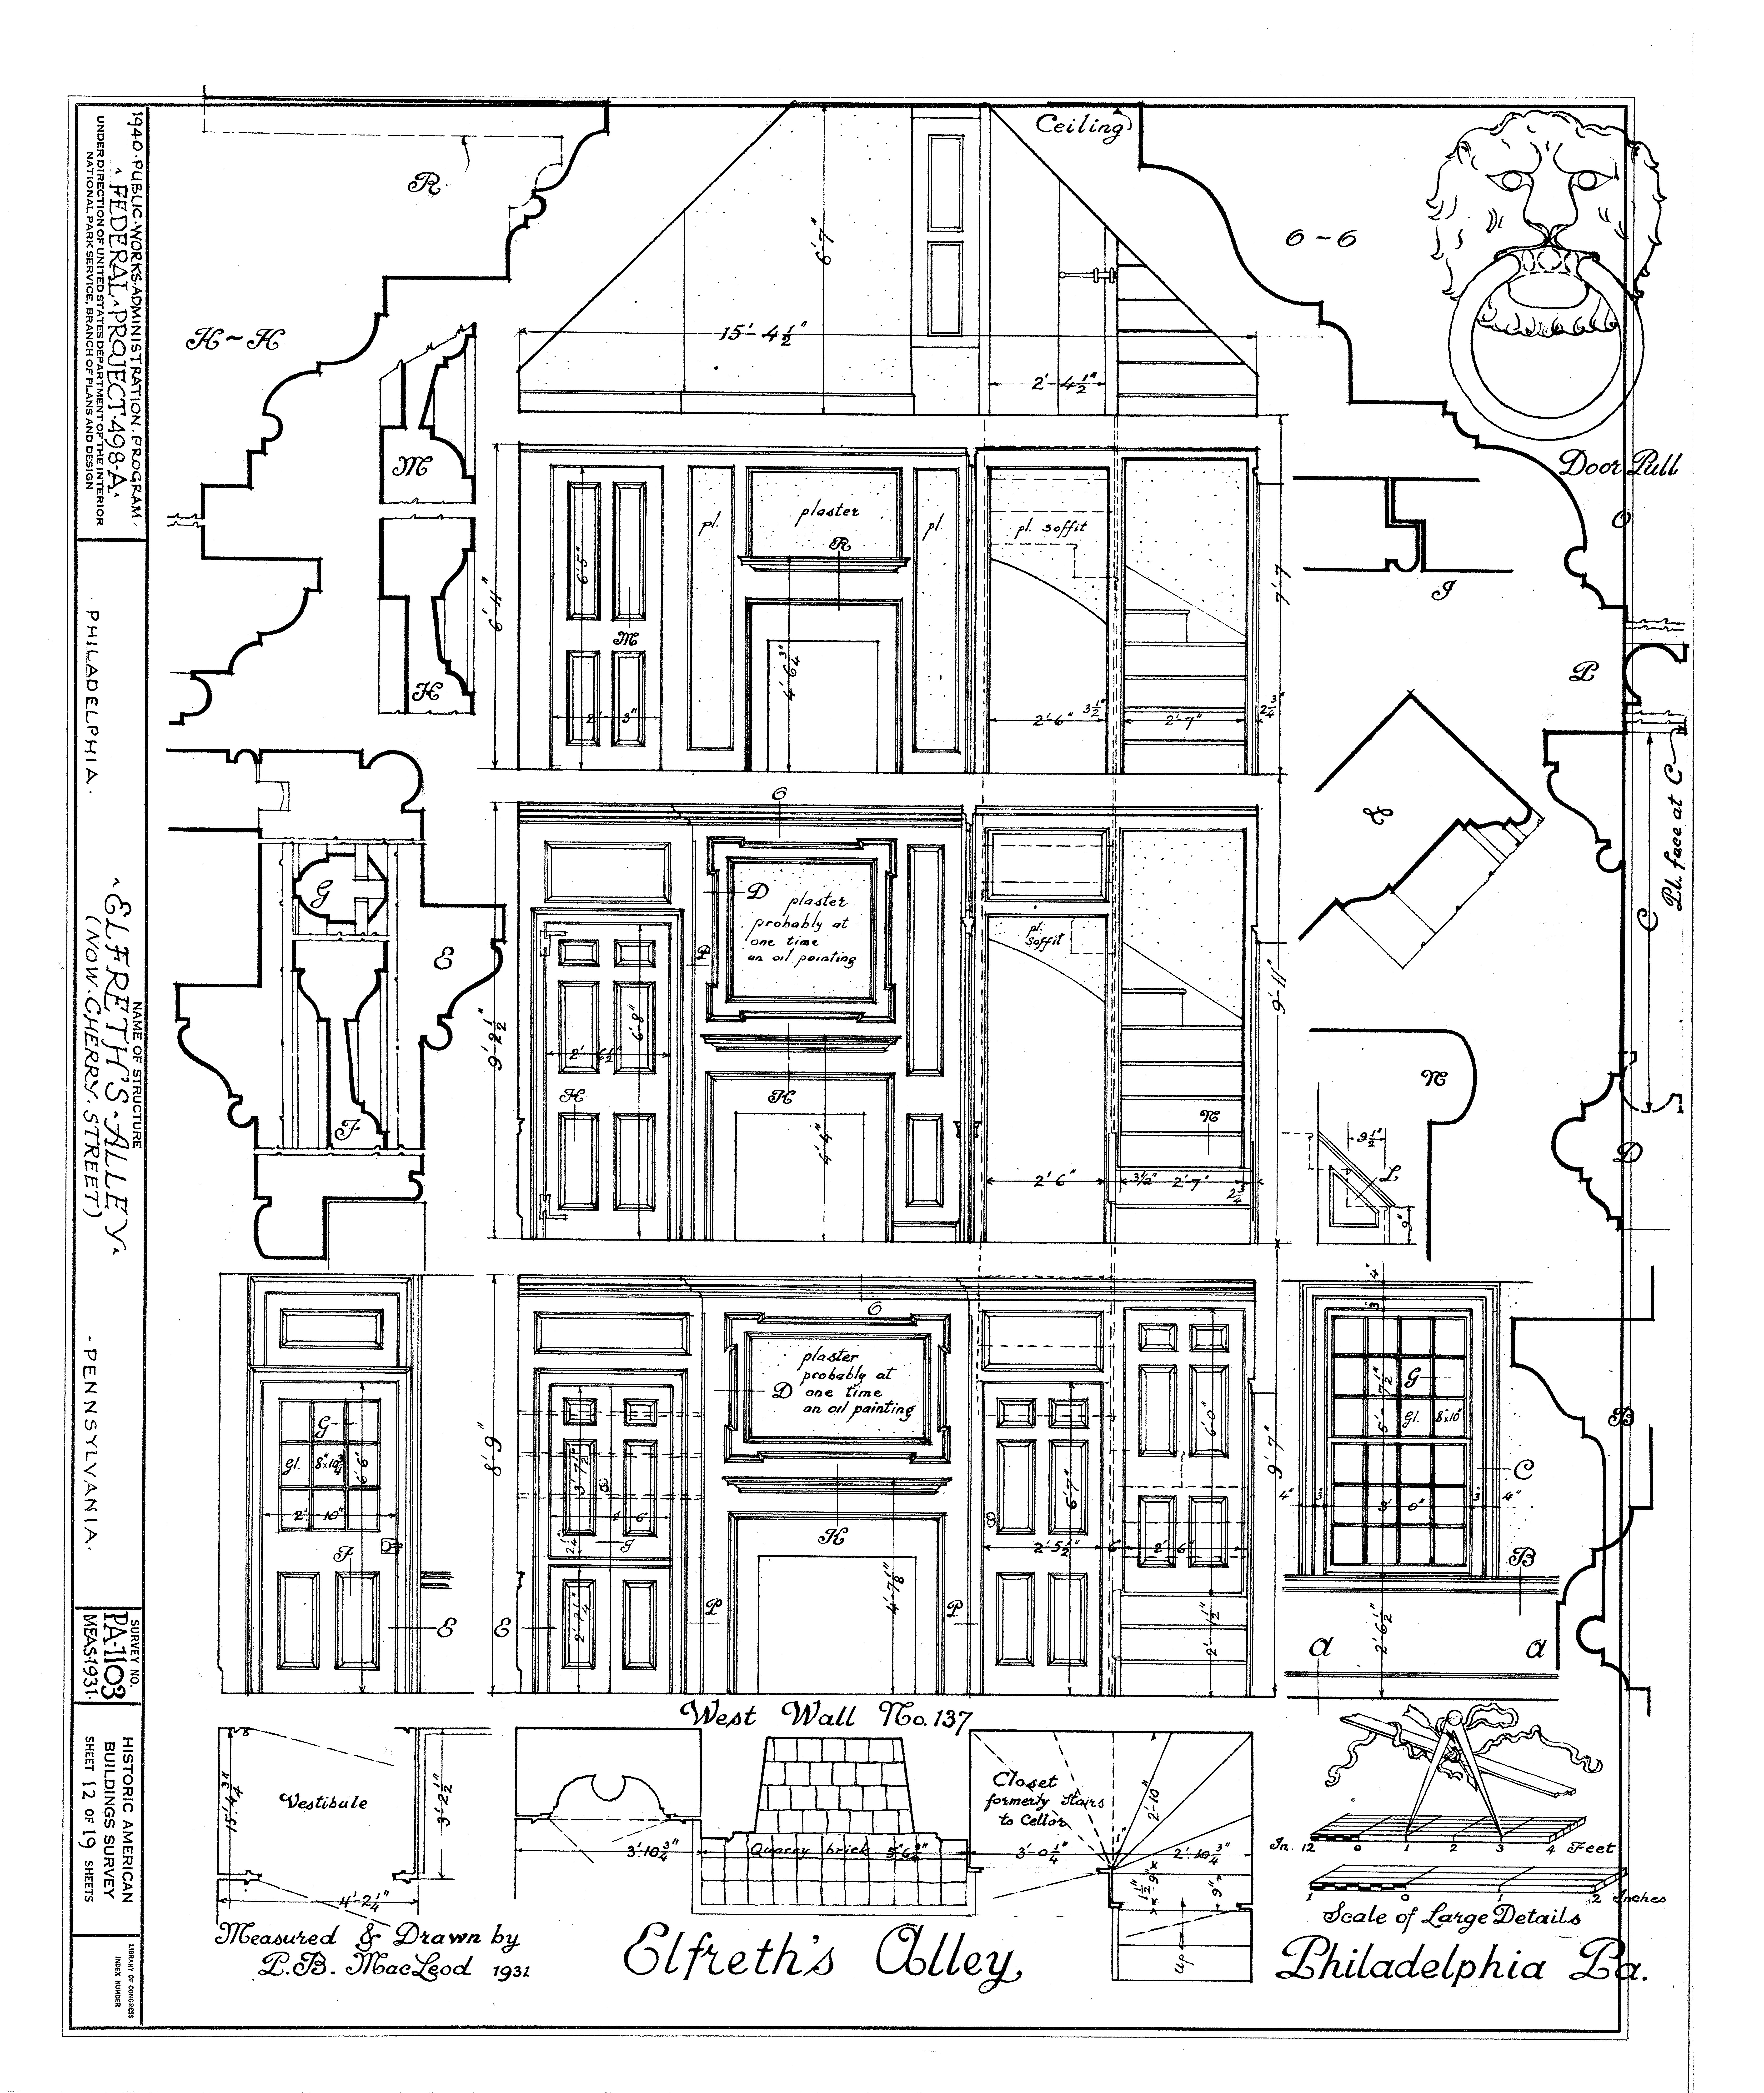 Blueprint of a house in Elfreth's Alley